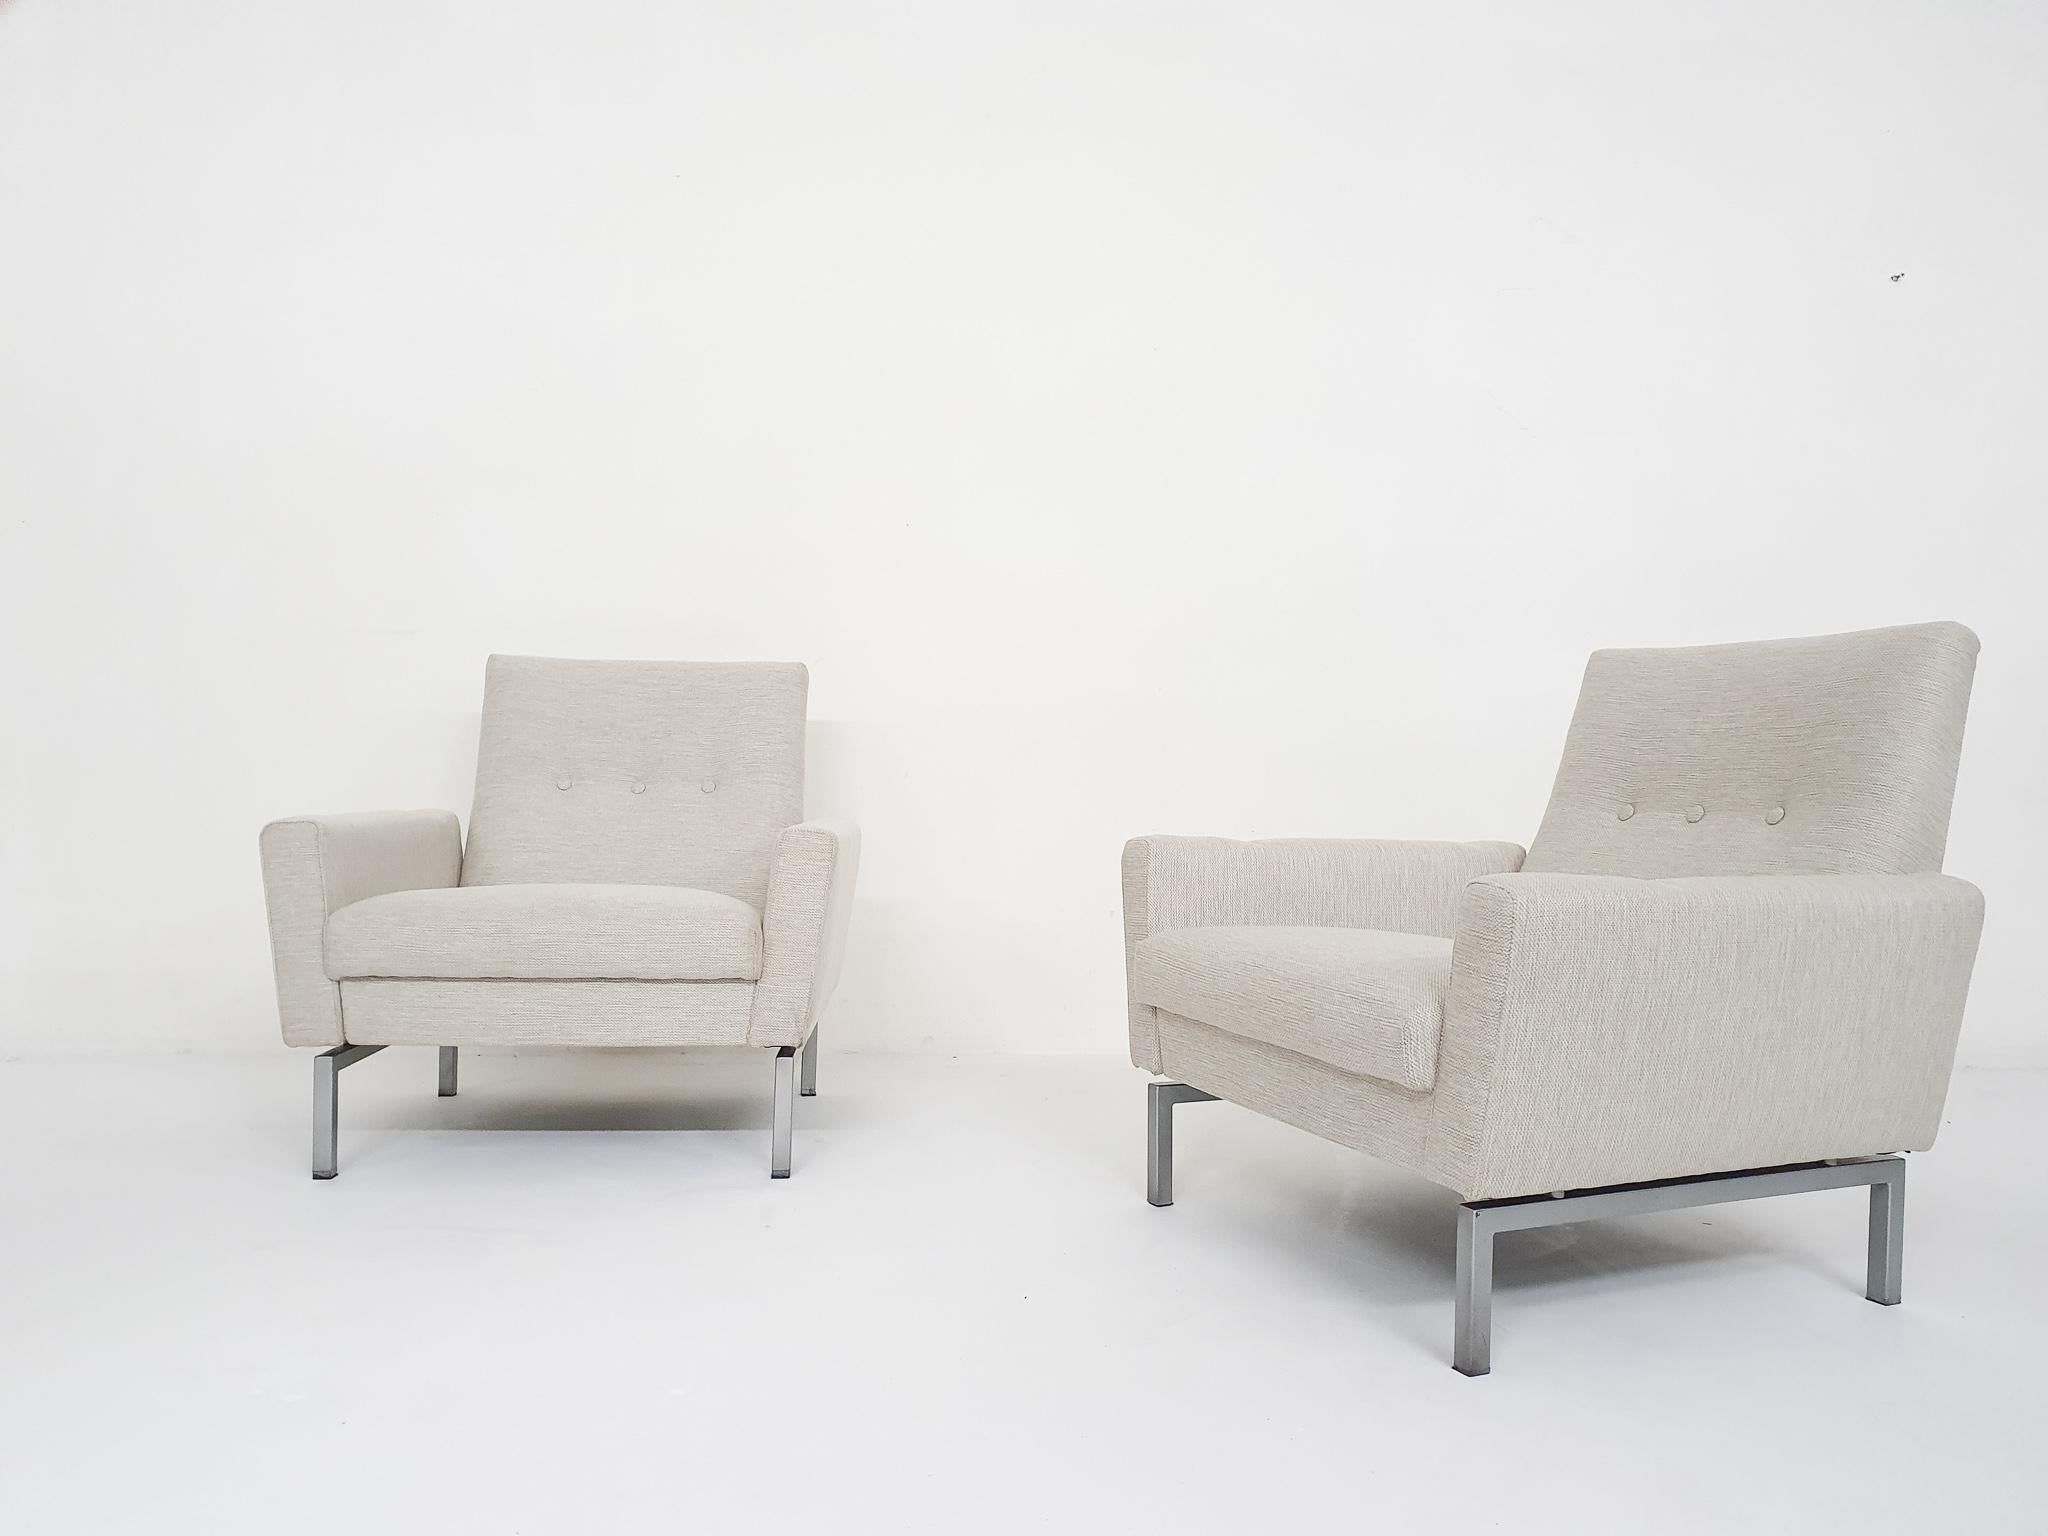 Set of two Mid-Century Modern lounge chairs attr. Artifort. Silver grey metal frame and new off white upholstery. The Netherlands 1950's.